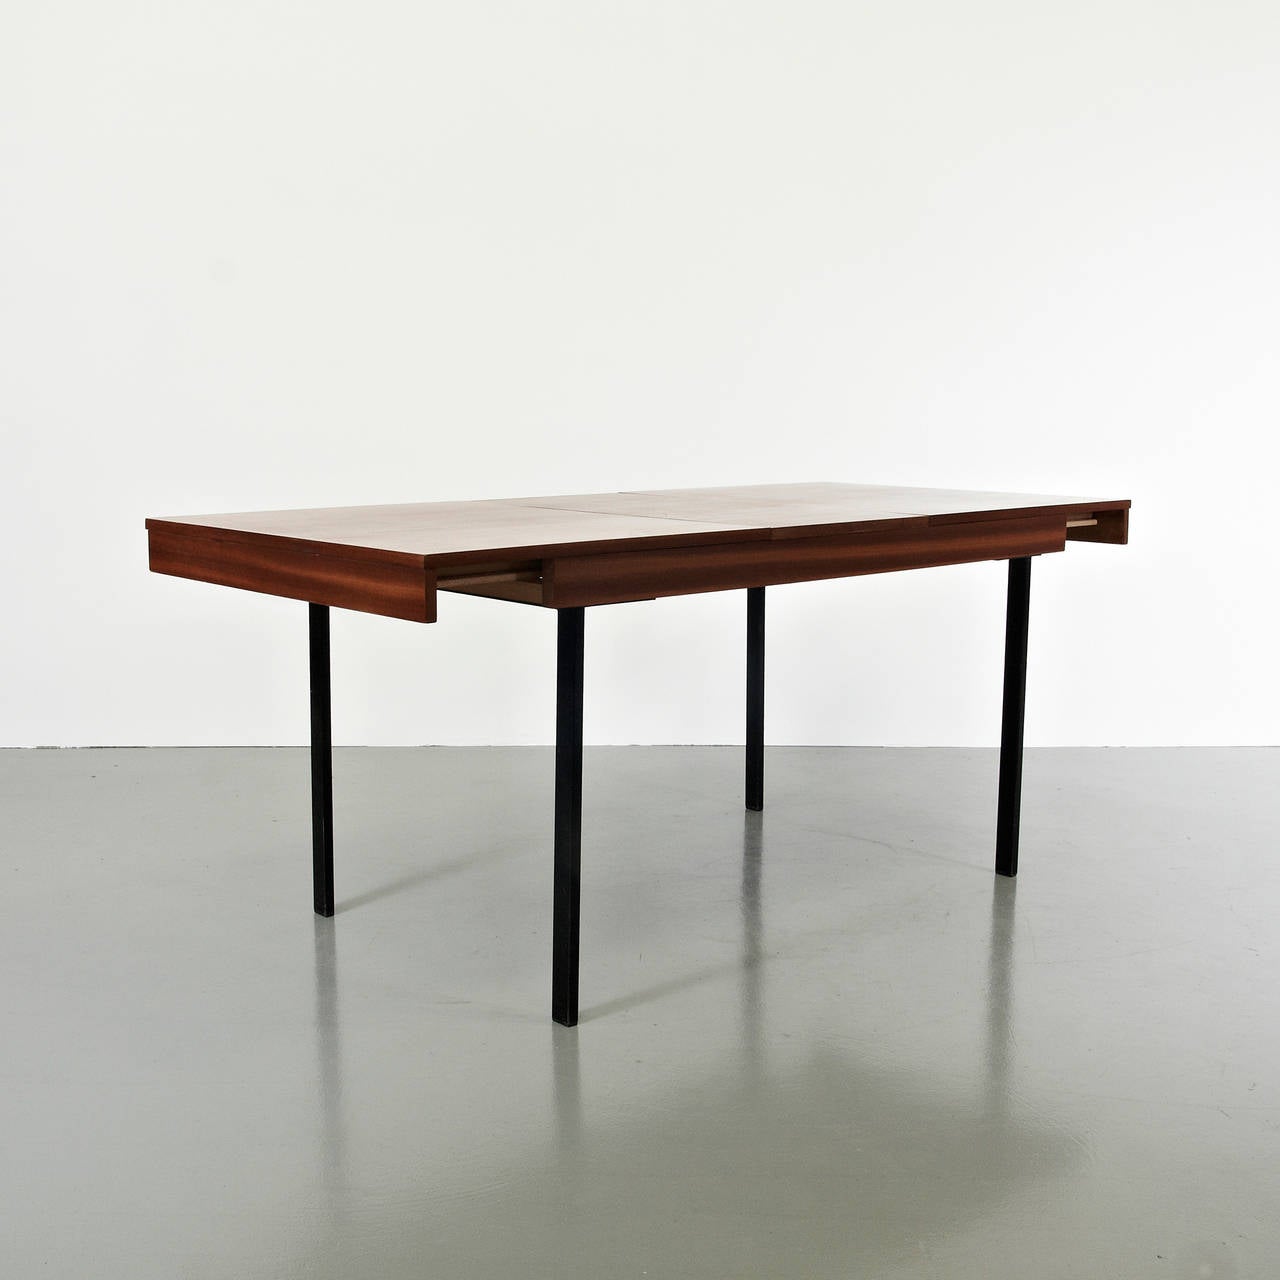 Pierre Guariche Adjustable Extension Dining Table for Meurop, circa 1950 In Good Condition For Sale In Barcelona, Barcelona